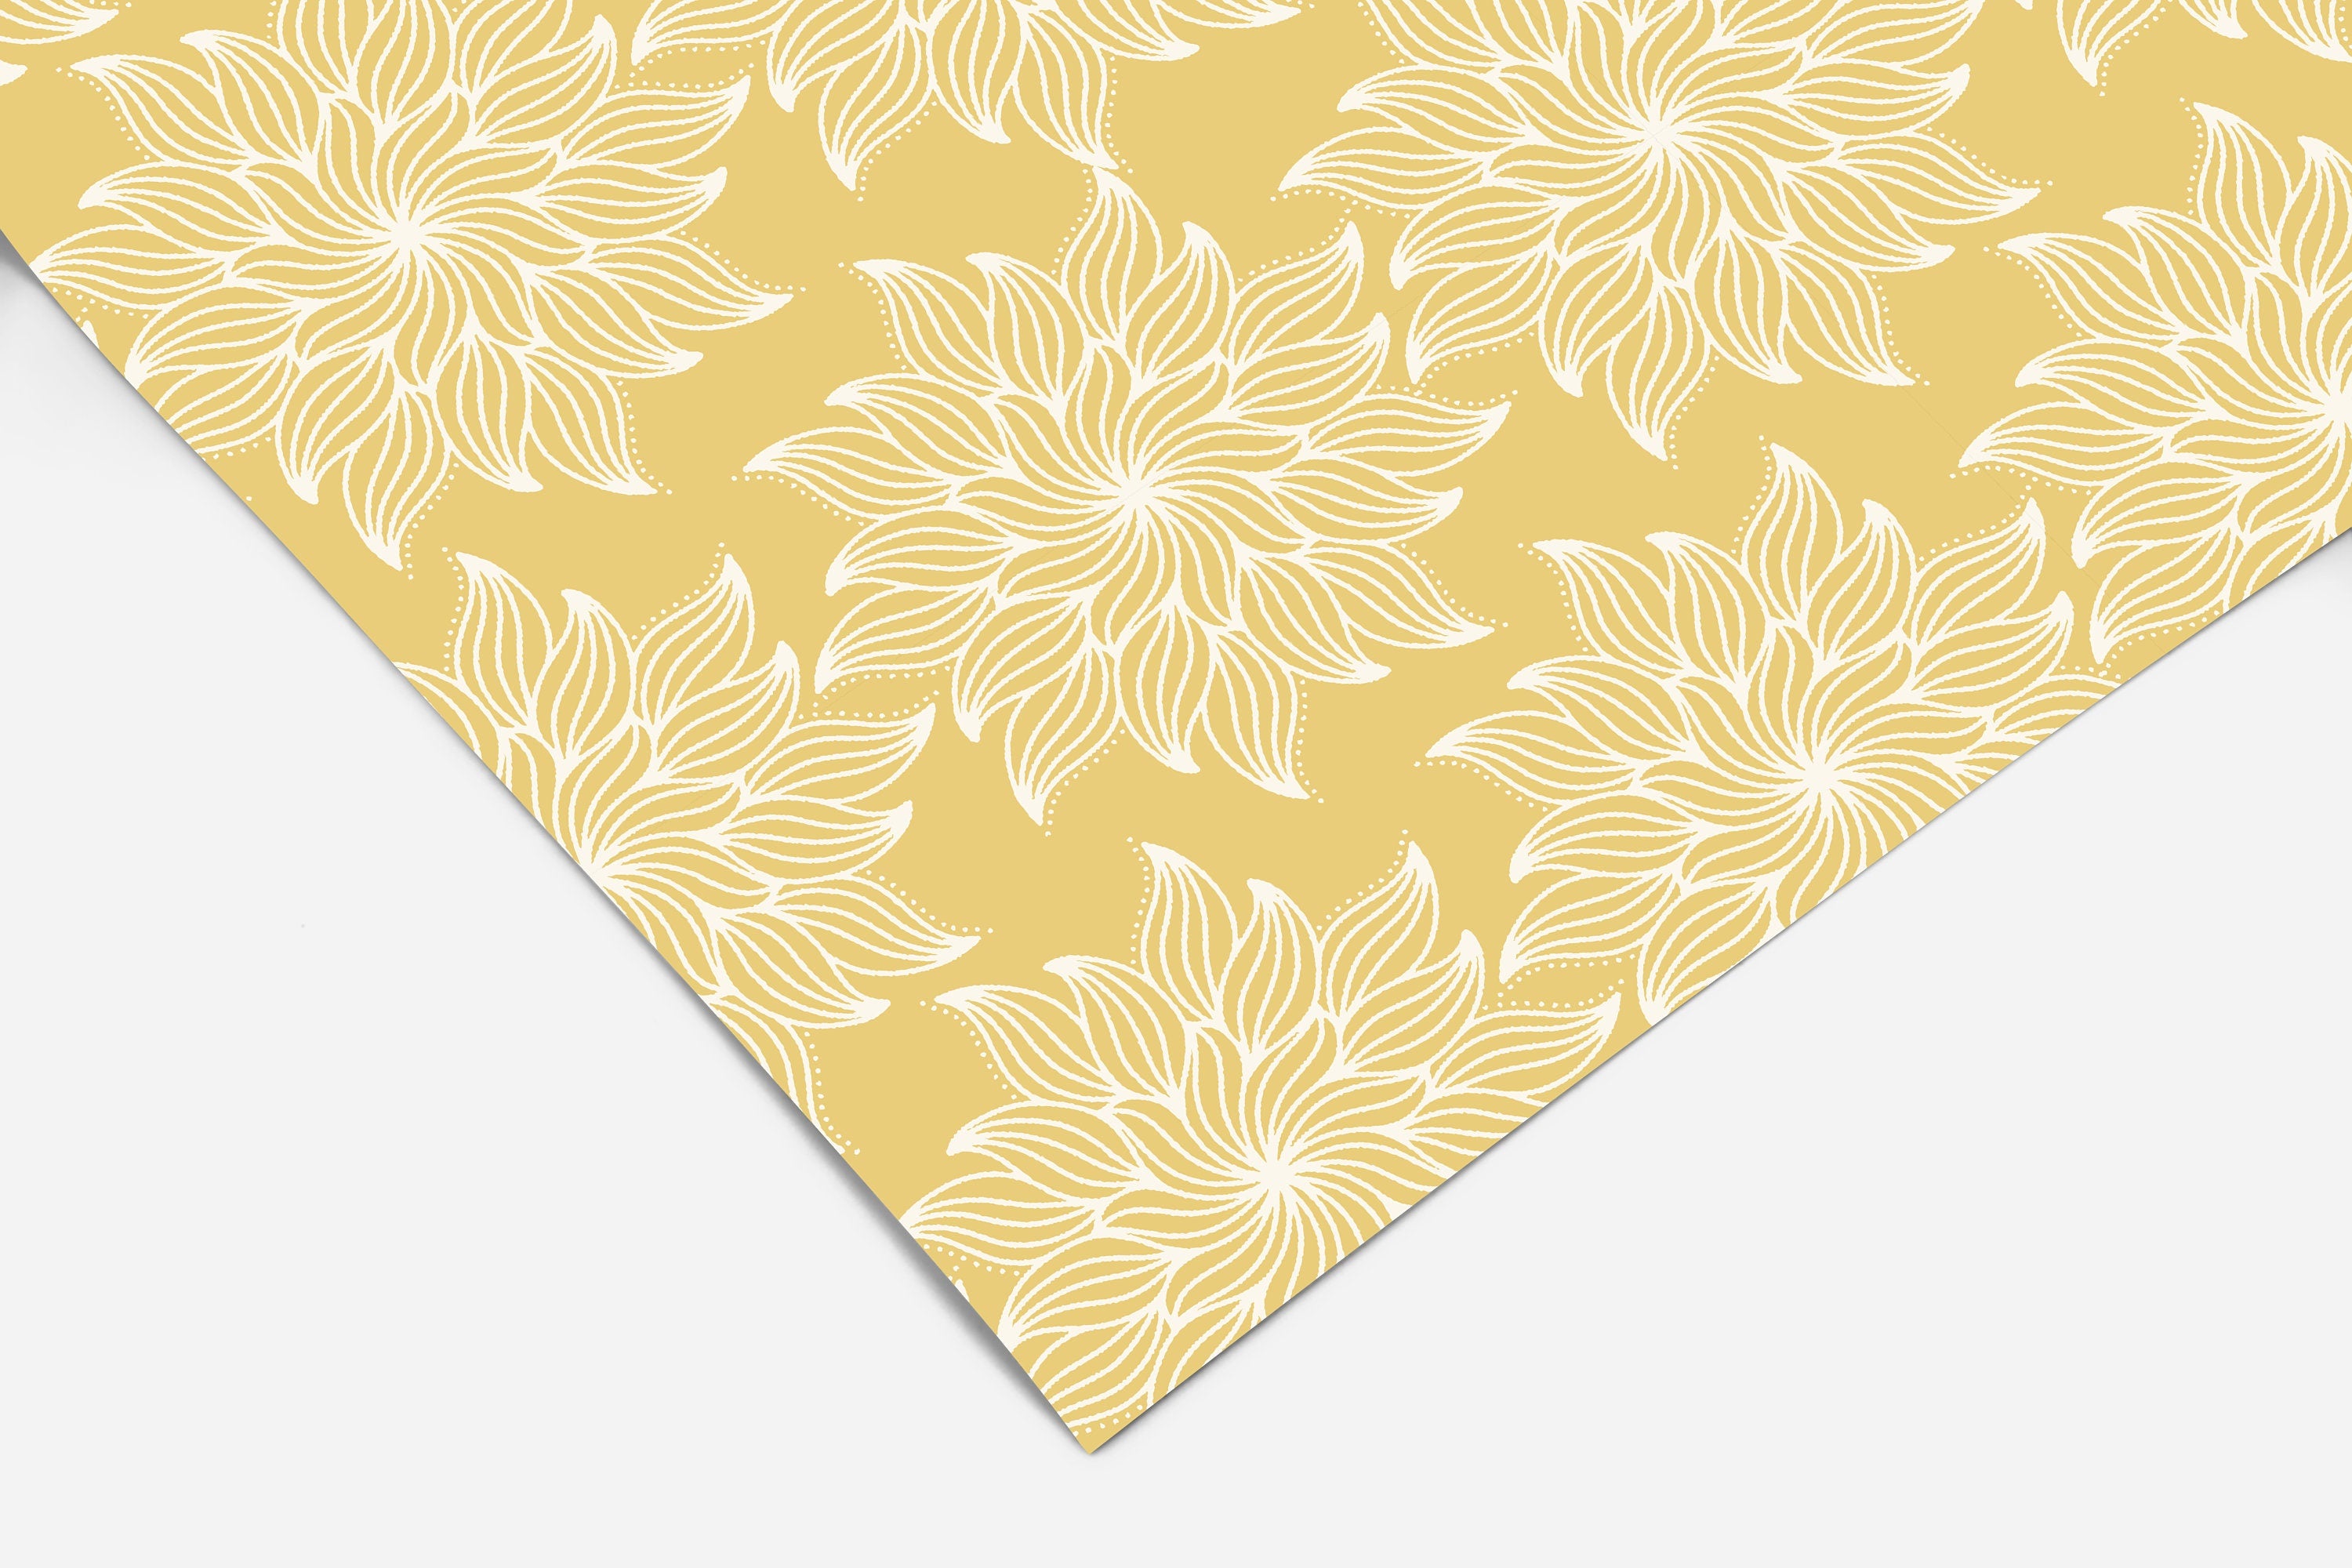 Summer Contact Paper | Peel And Stick Wallpaper | Removable Wallpaper | Shelf Liner | Drawer Liner | Peel and Stick Paper 101 - JamesAndColors